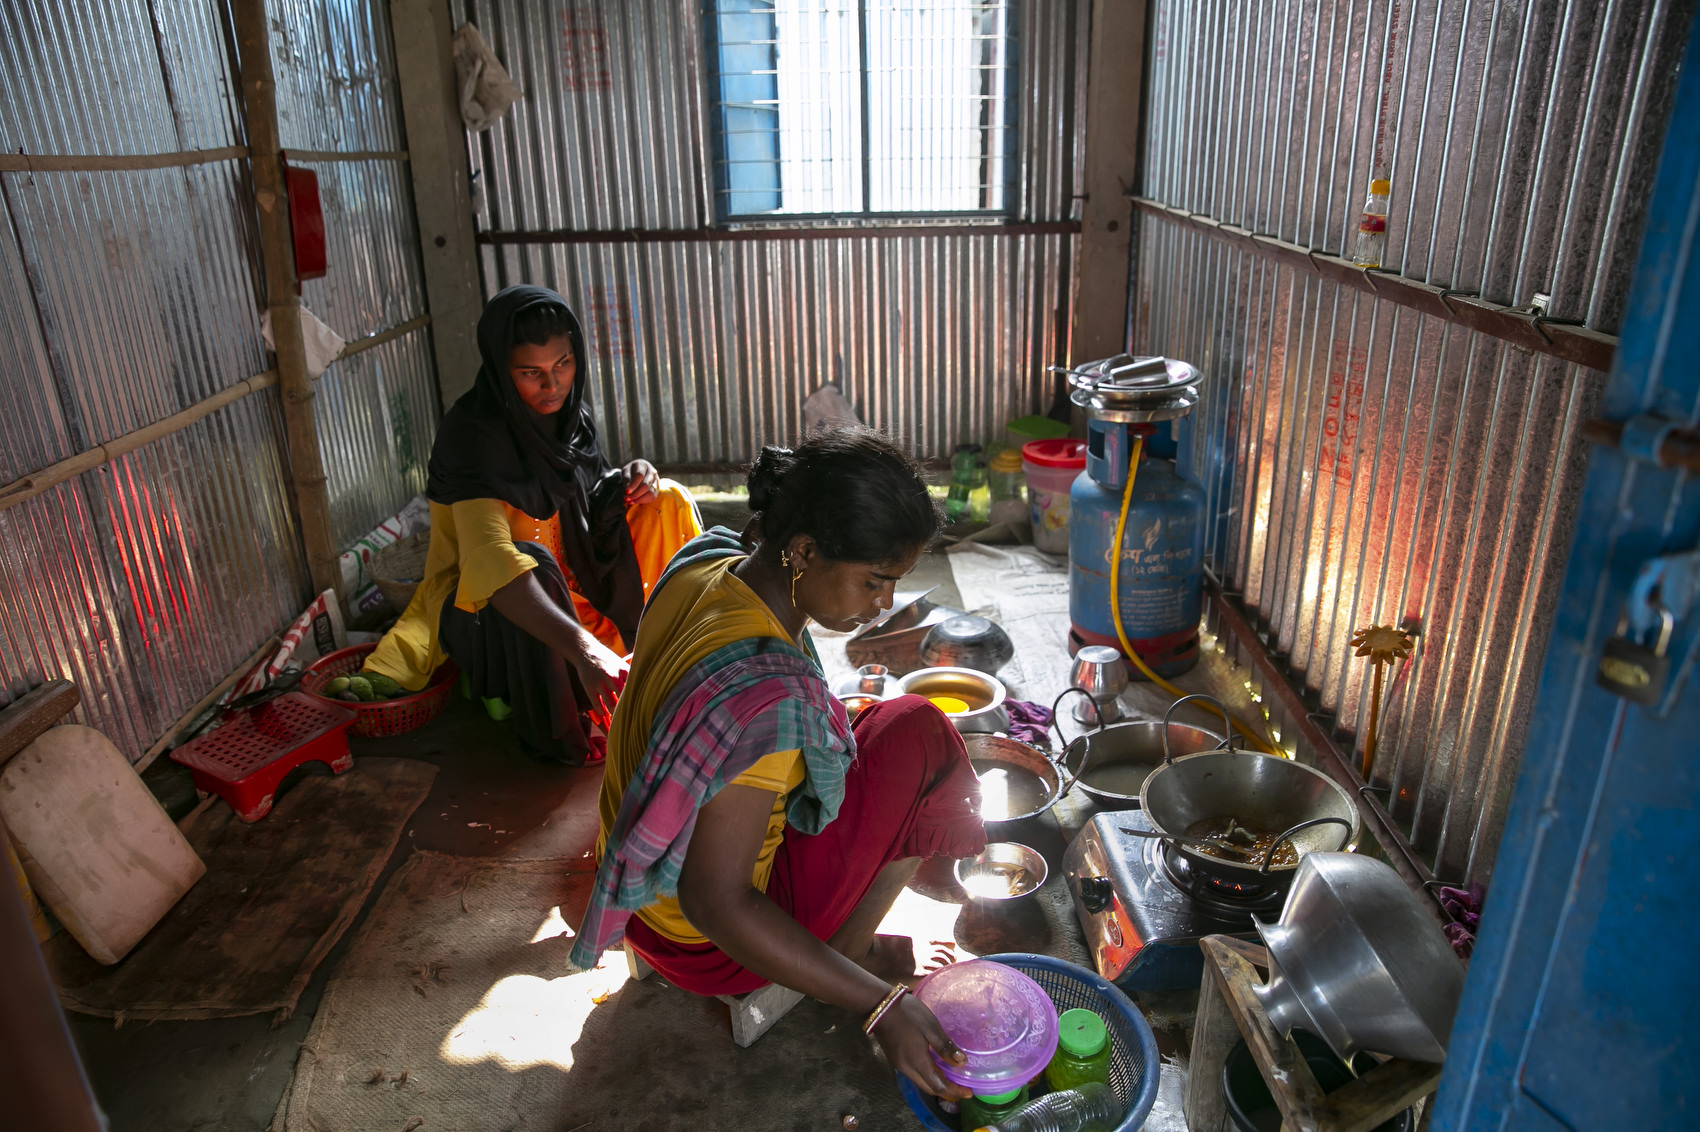 SHERPUR, BANGLADESH - SEPTEMBER 21:  Suravi and Hashi cook breakfast together on September 21, 2021 in Sherpur, Bangladesh. In South Asia, “hijras” are identified as a category of people who are assigned as male at birth but develop a feminine gender identity. They are generally outcasted from mainstream society, and have no other way of earning money other than harassing and extorting people for money. A new government initiative aims to change that. Recently, 40 Hijra were given homes, grants, loans, livestock, and livelihood training in an effort to make them self sufficient. (Photo by Allison Joyce/Getty Images)